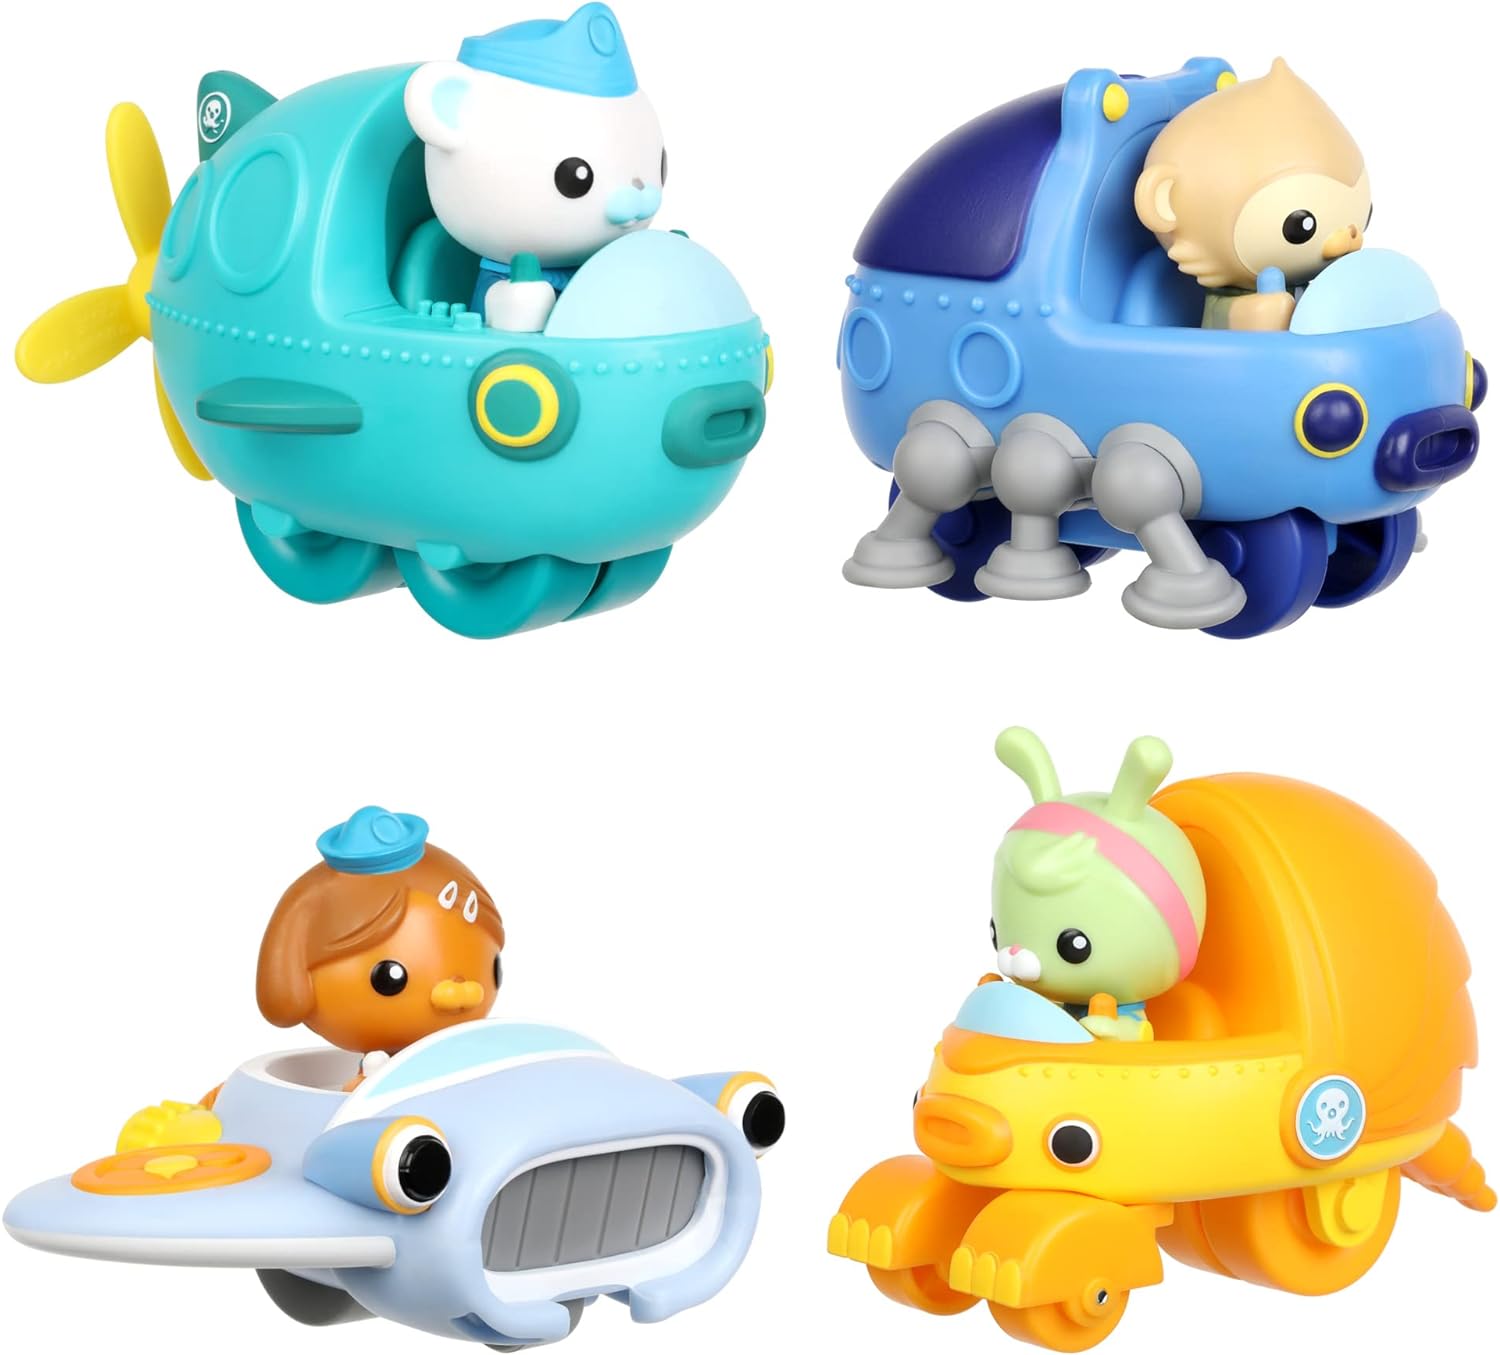 Are These The Best Octonauts Toys: Discover the Top Gup X Playsets